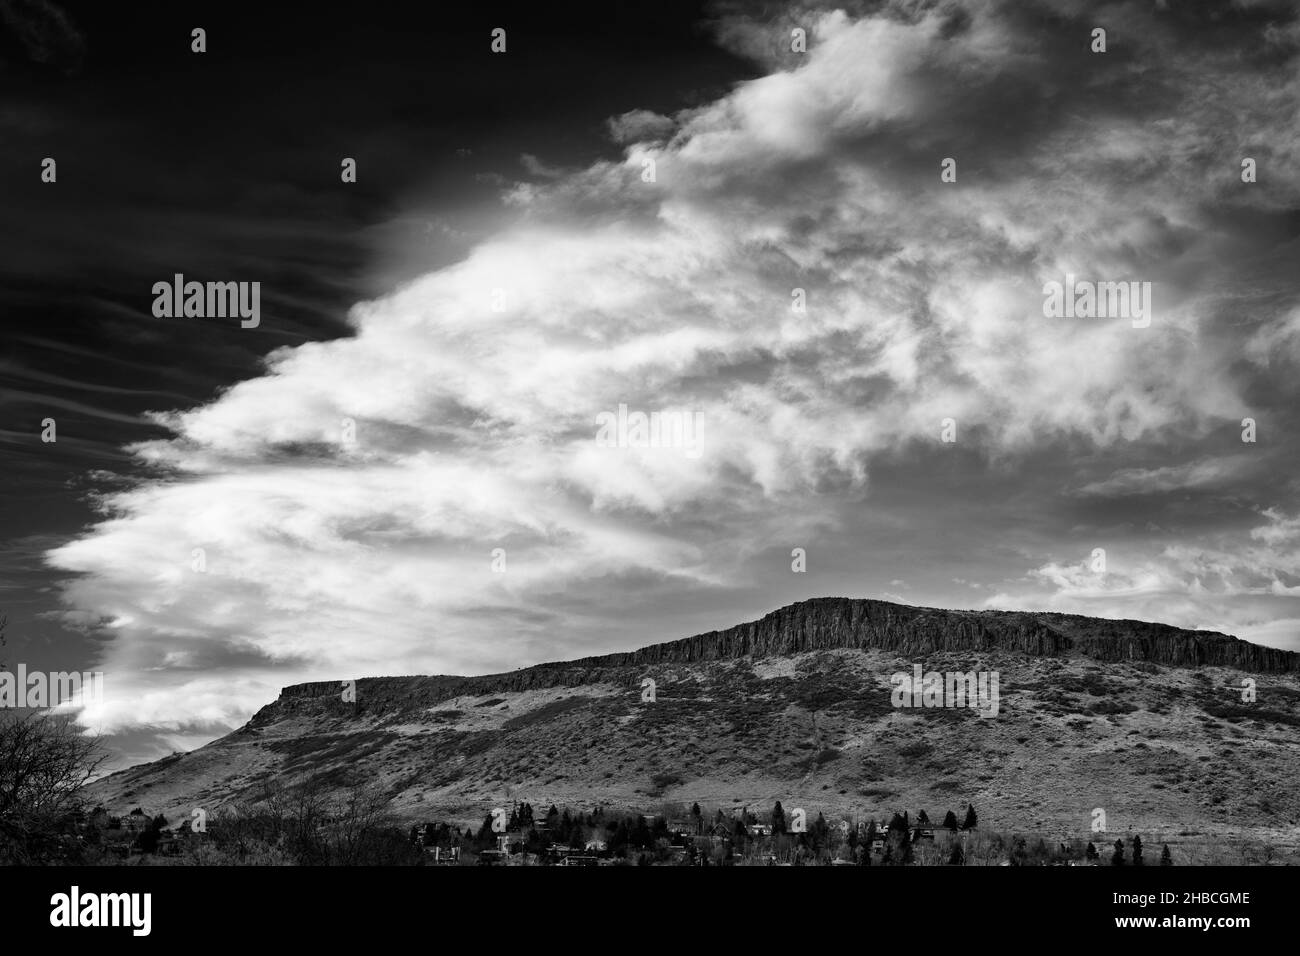 Cloud formation over North Table Mountain - Golden, Colorado USA [B&W Image] Stock Photo